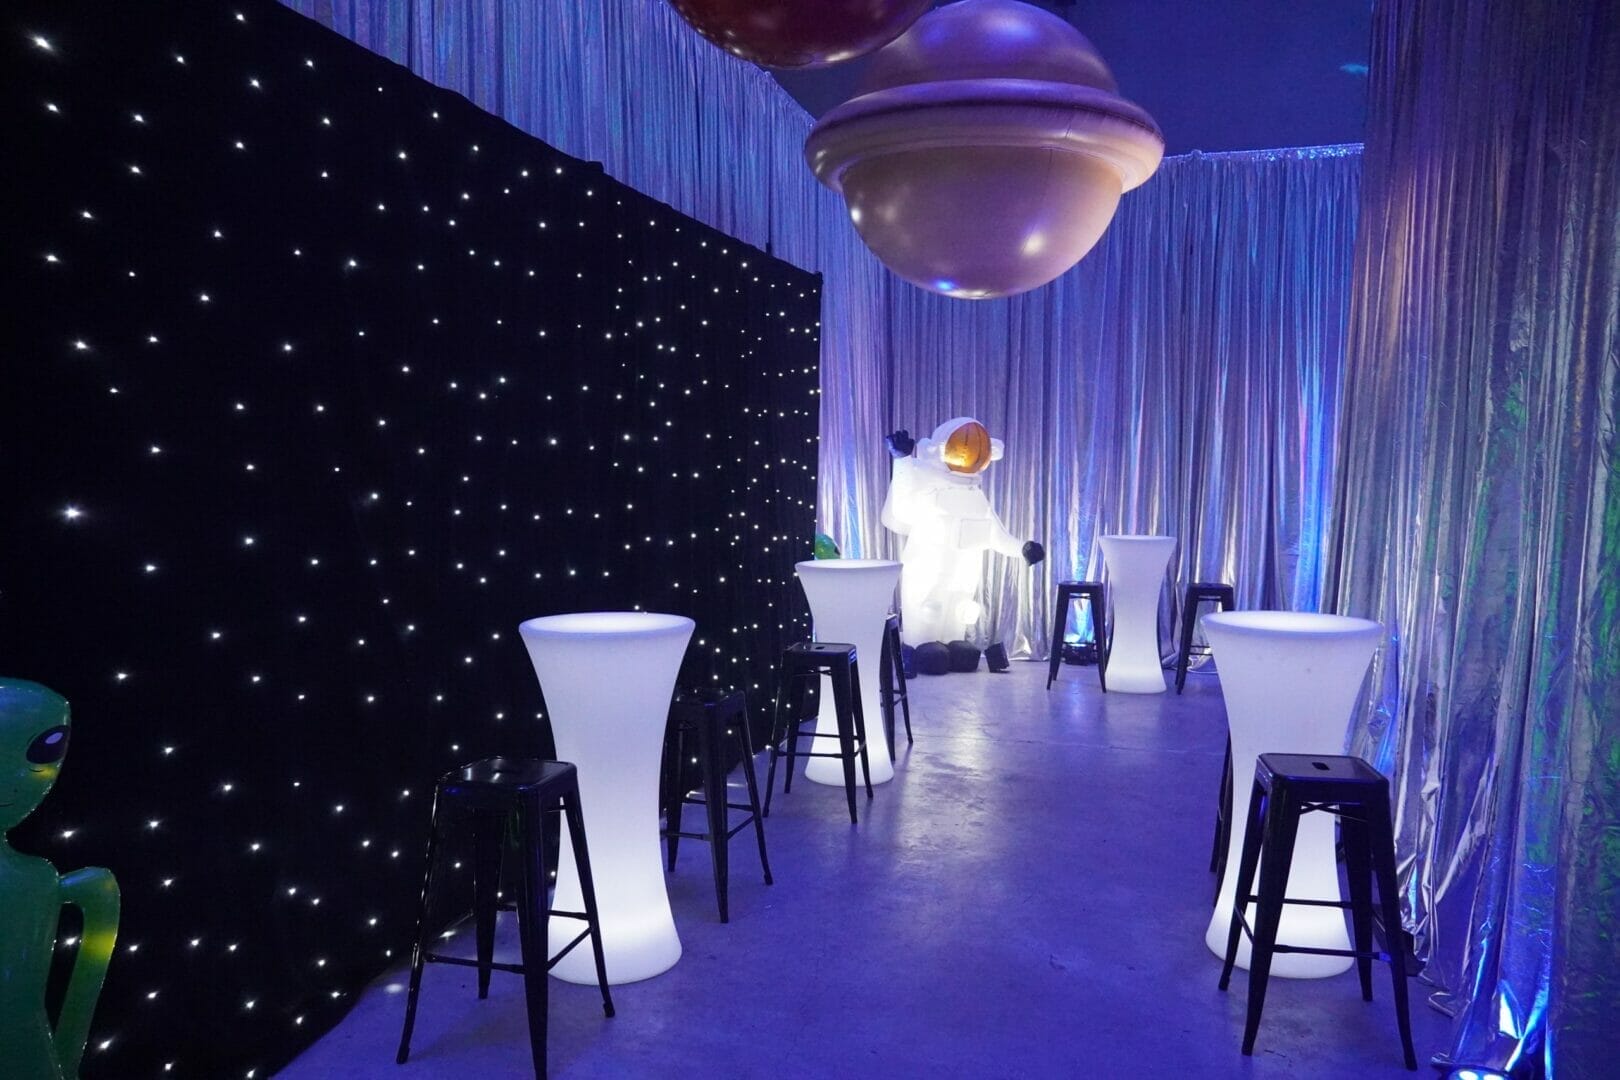 Star cloth and illuminated bar tables at space themed party